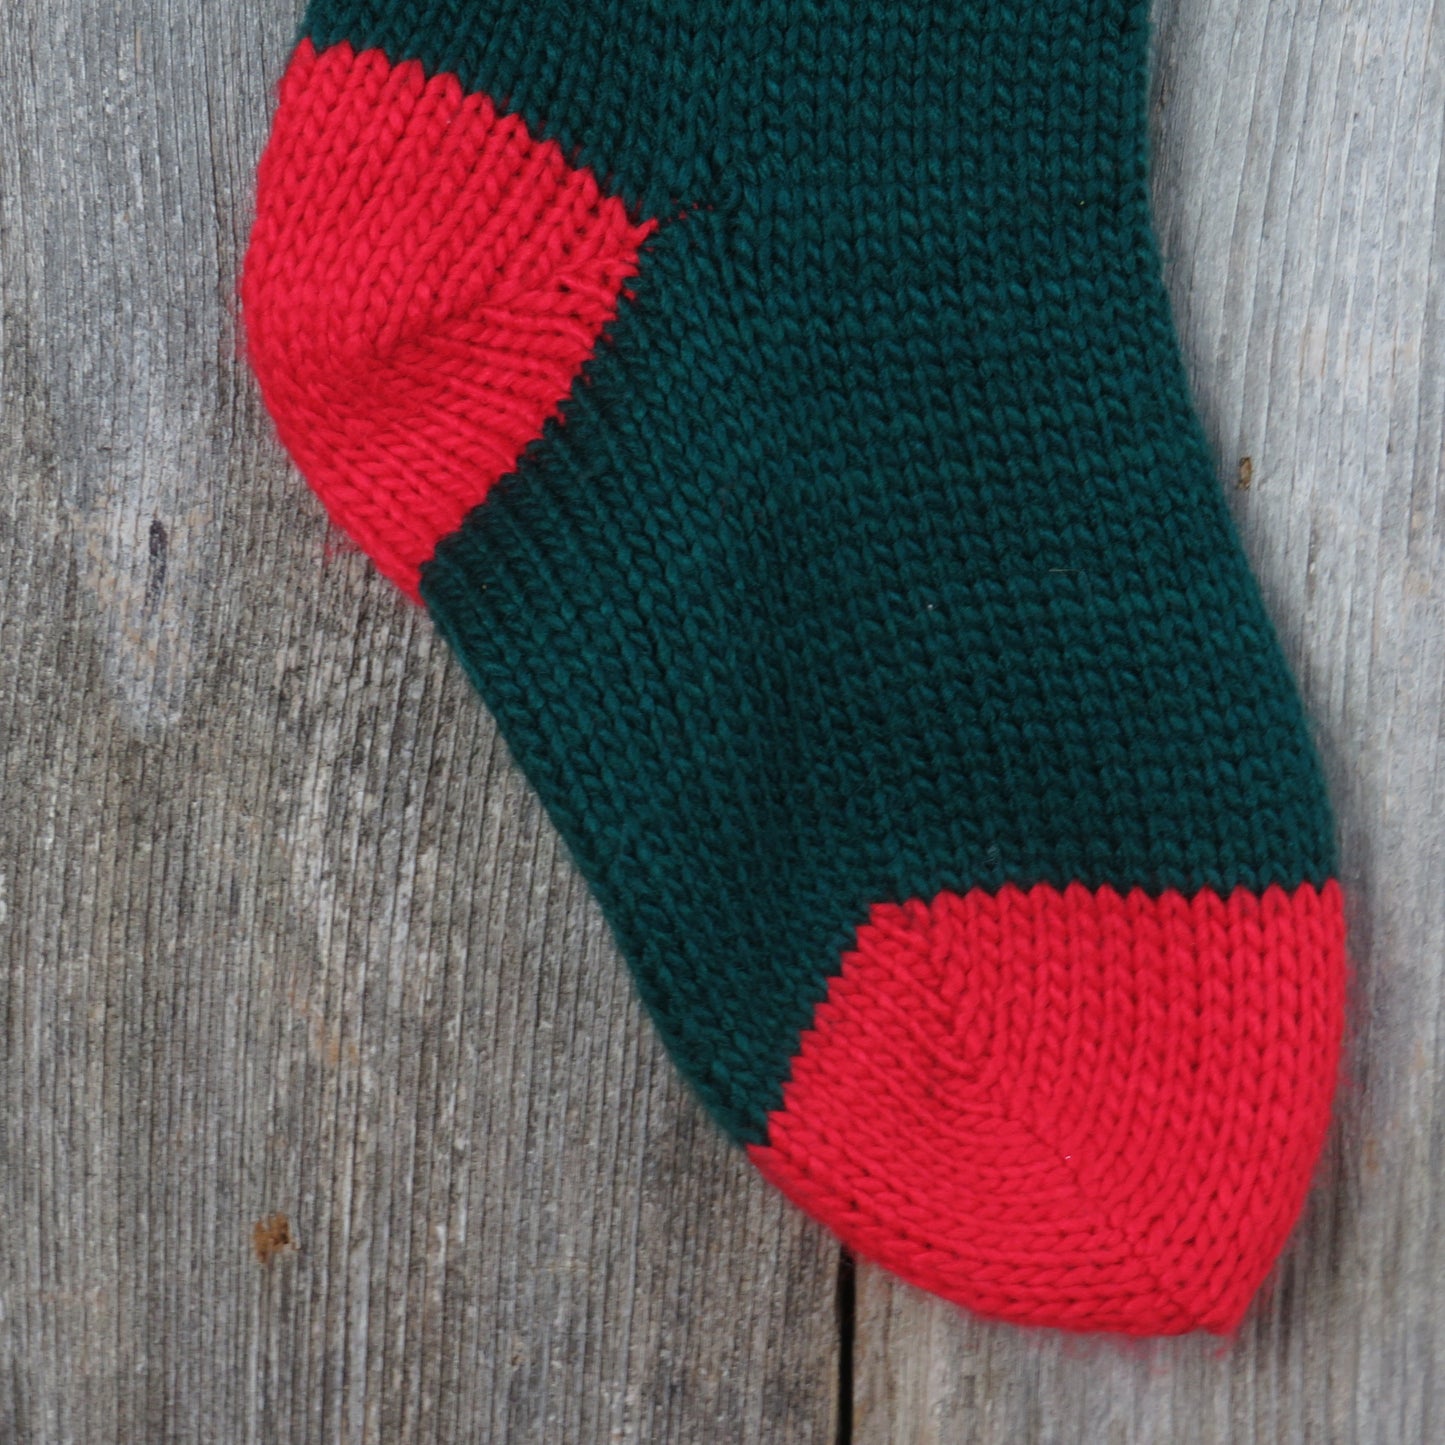 Vintage Striped Zipper Knit Christmas Stocking Green Red Knitted Department 56 1988